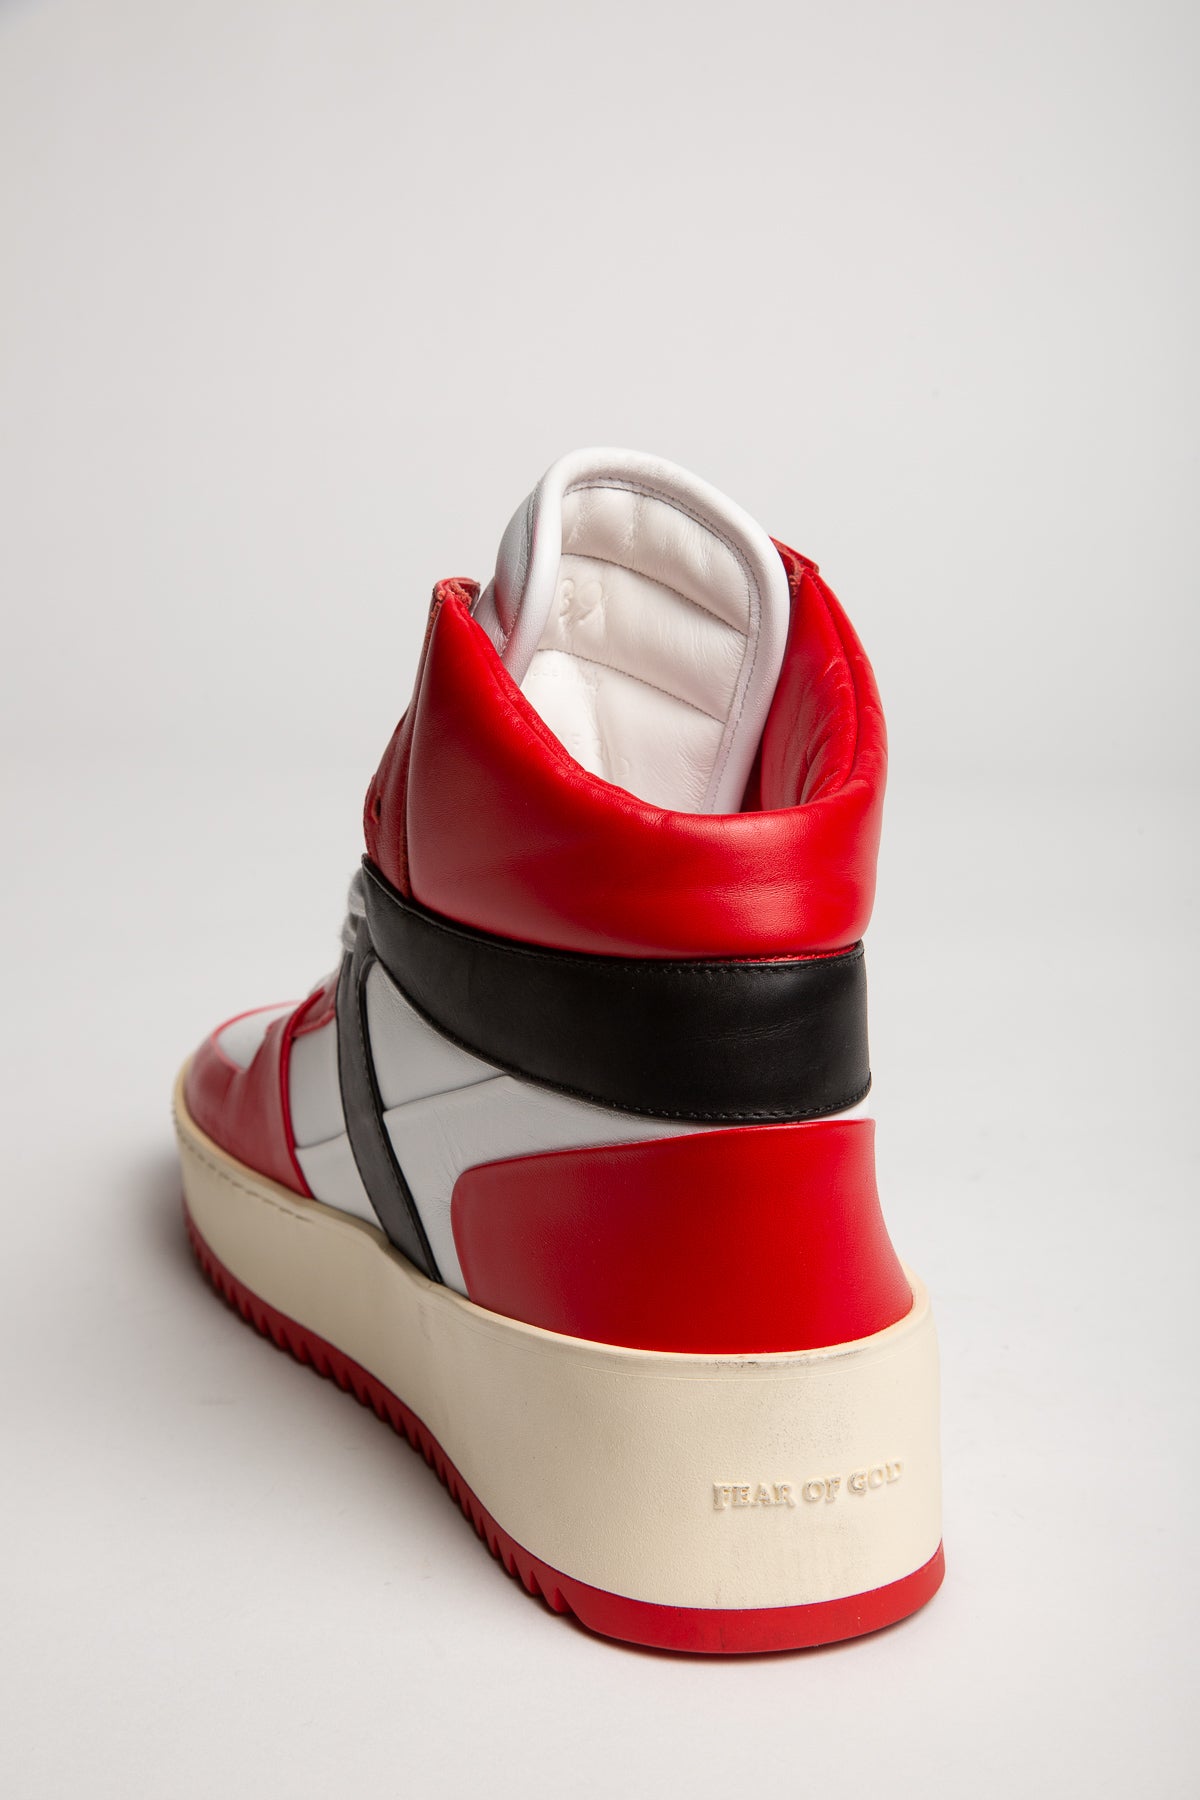 FEAR OF GOD | RETRO BASKETBALL SNEAKERS